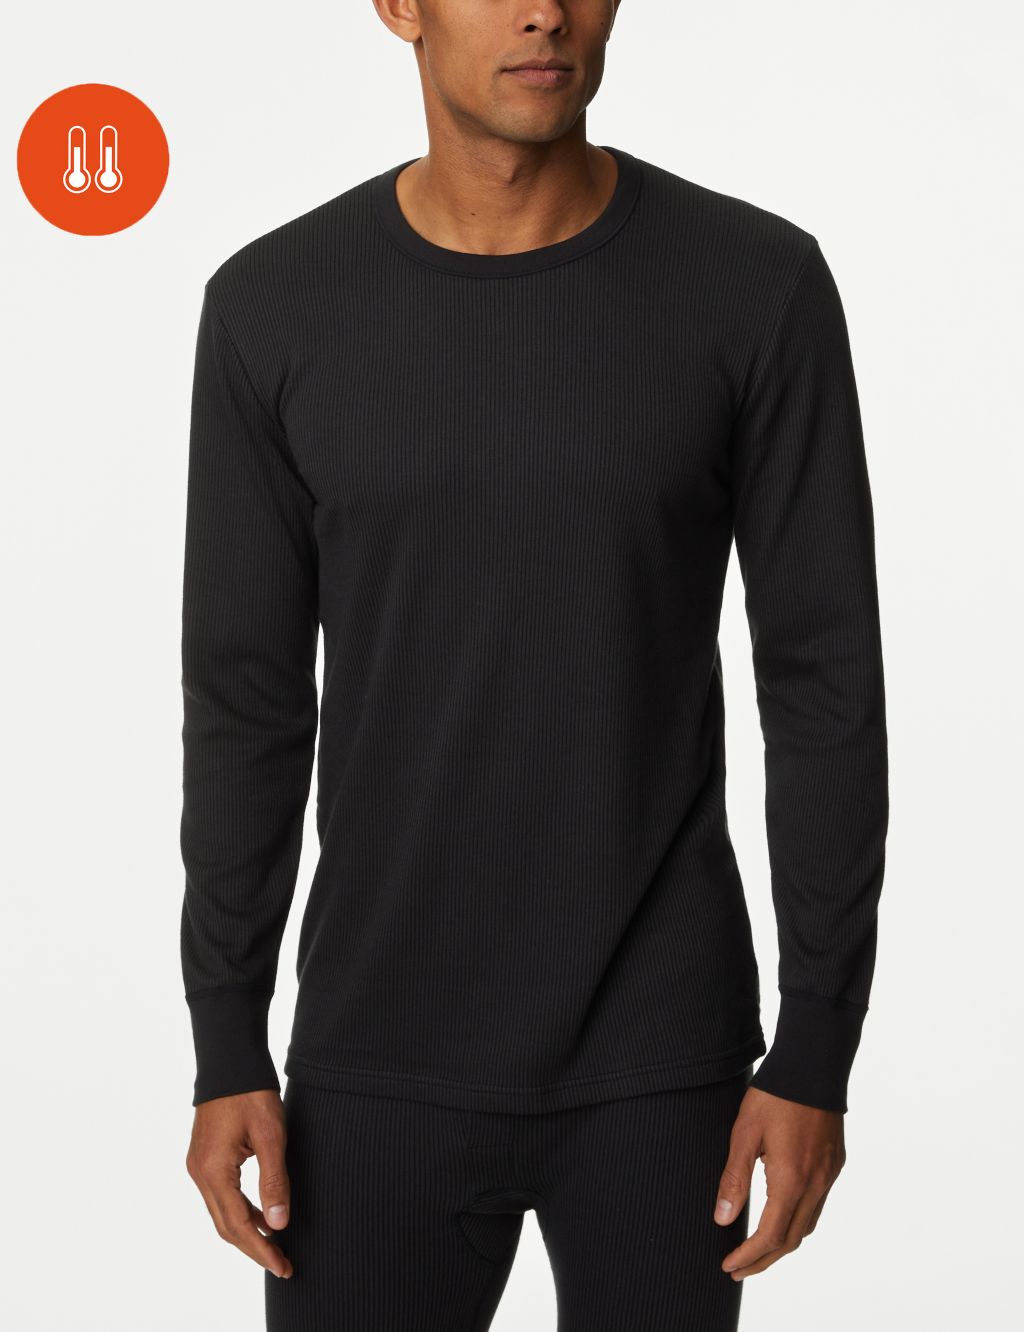 Buy White Long Sleeve Thermal T-Shirt Online in UAE from Matalan